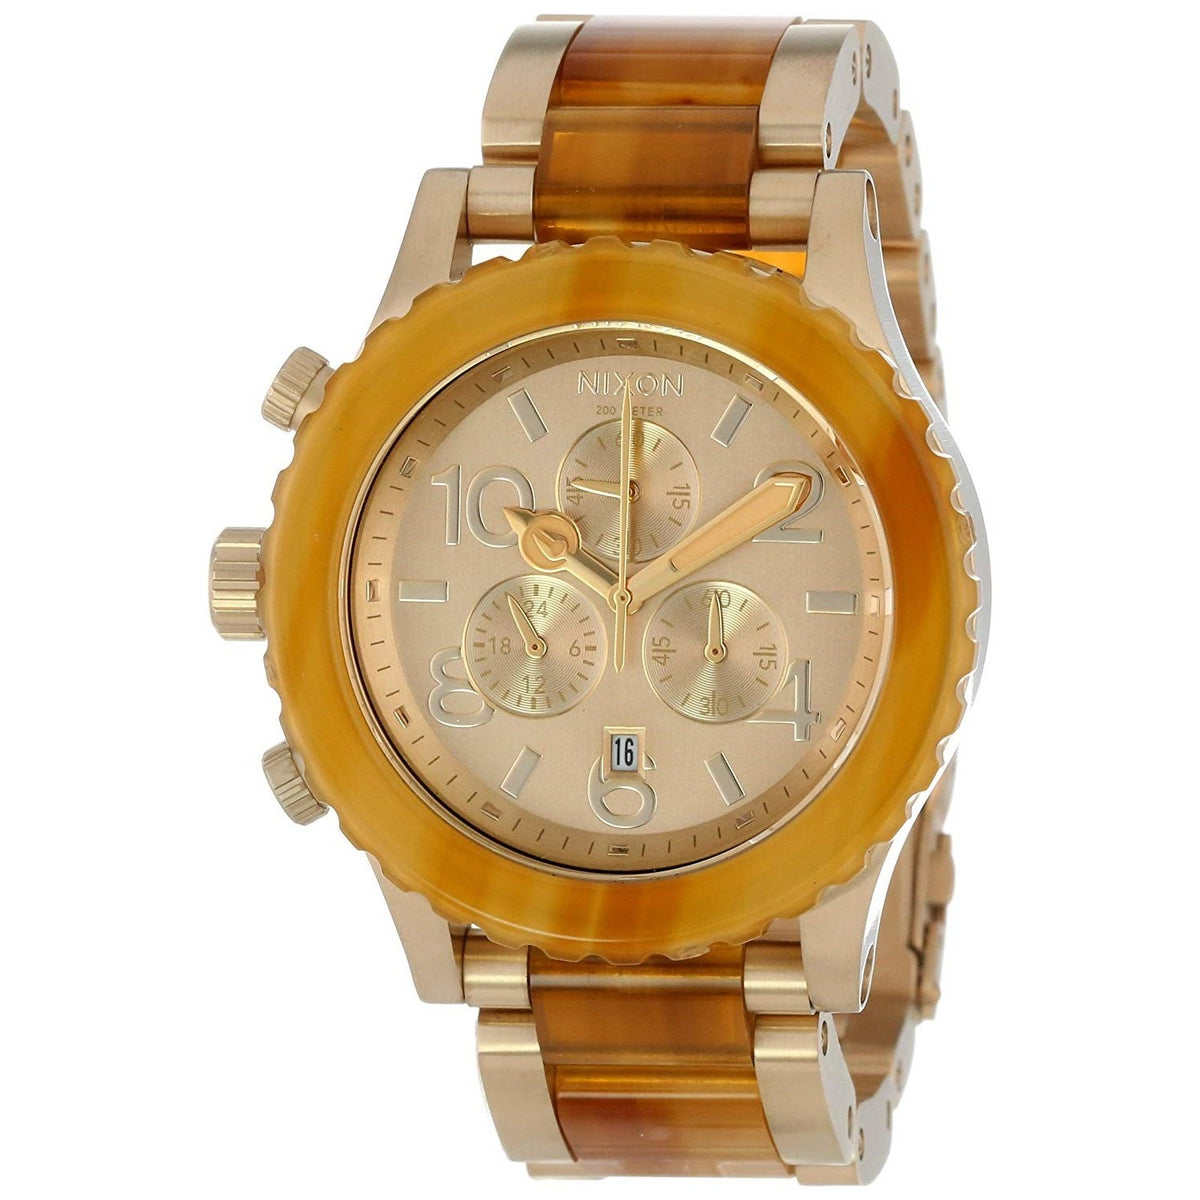 Nixon Unisex A037-1423 42-20 Chrono Chronograph Gold-Tone Stainless Steel with Acetate center links Watch